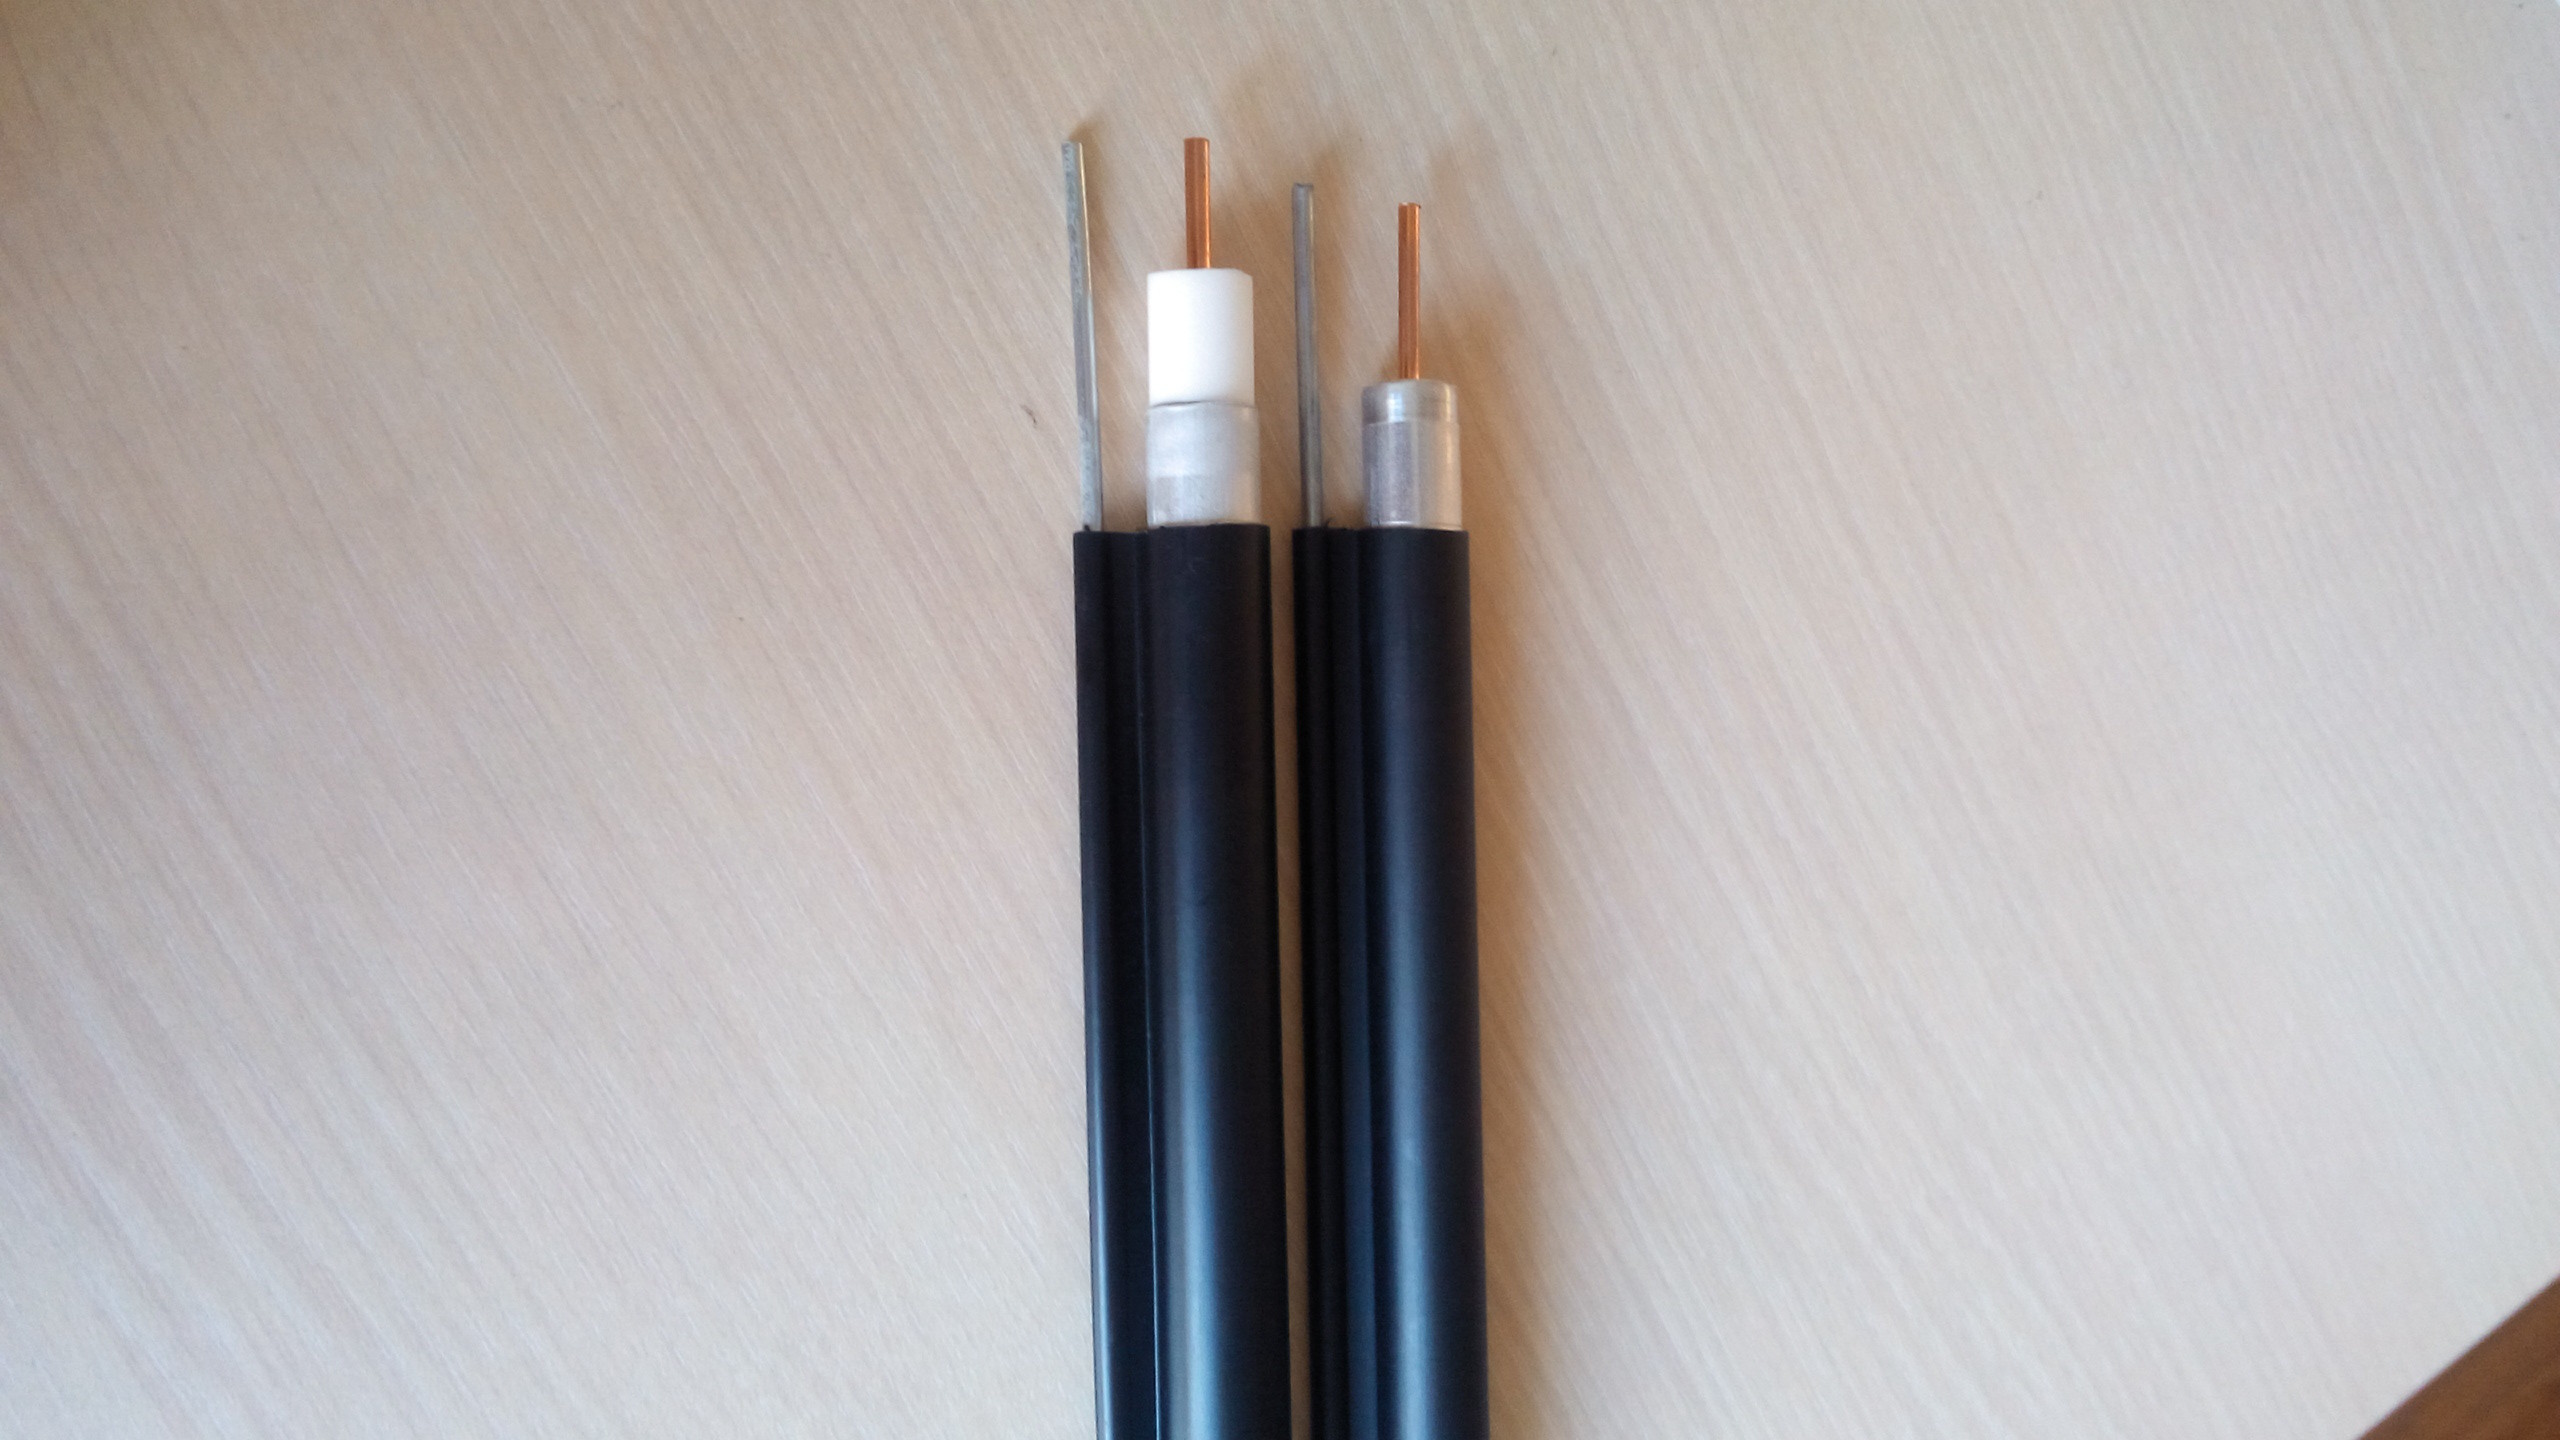  Indoor CATV Trunk Cable Broadband  Braiding Distribution RG216 Coaxial Cable 75 Ohm Manufactures